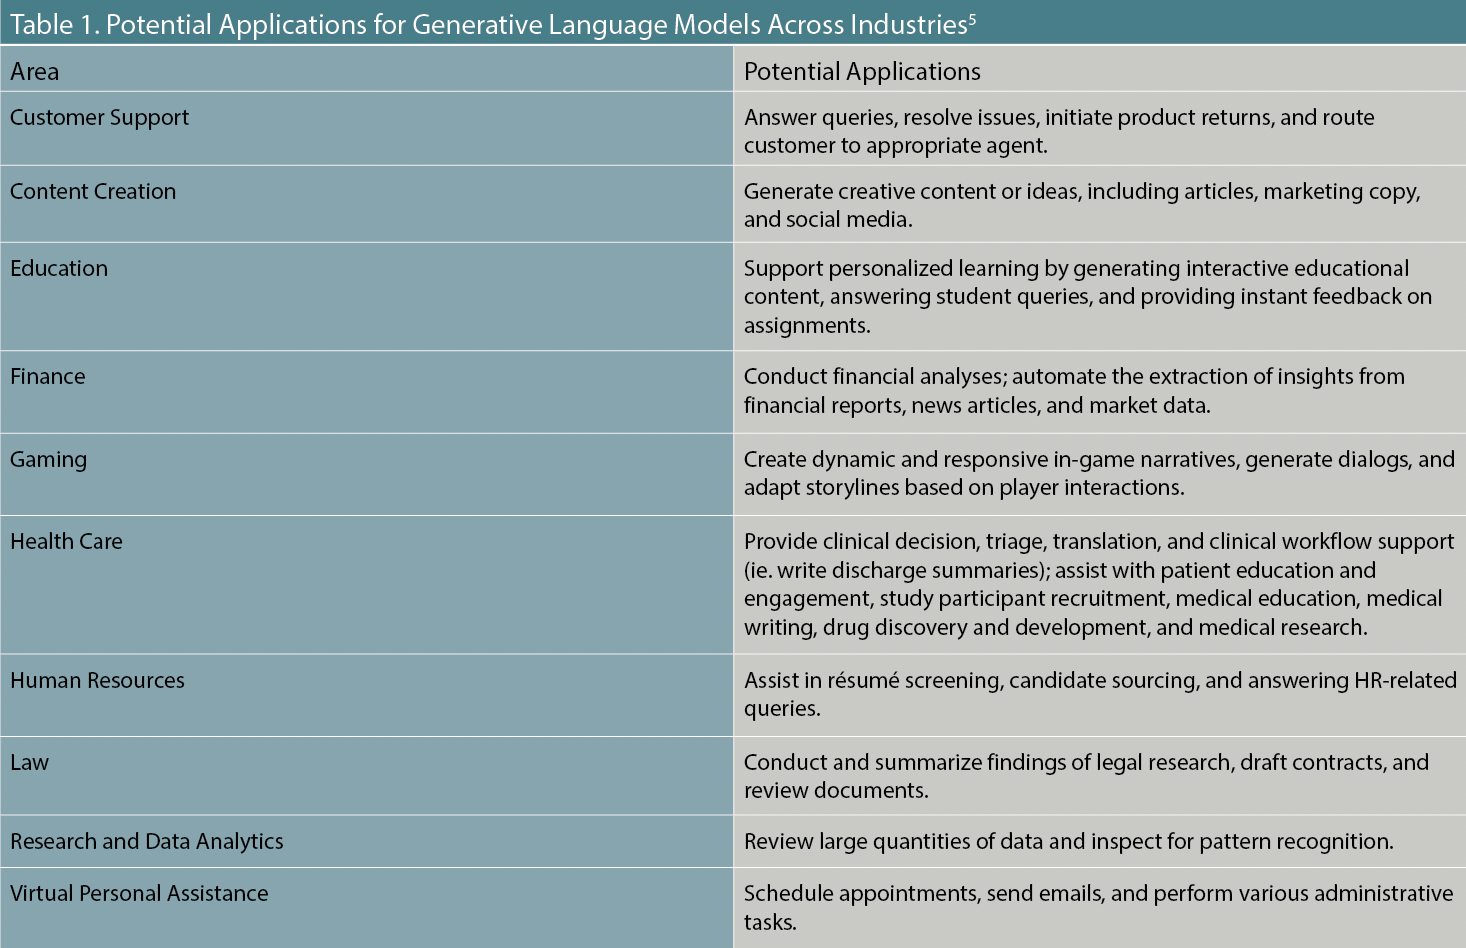 Table 1. Potential Applications for Generative Language Models Across Industries